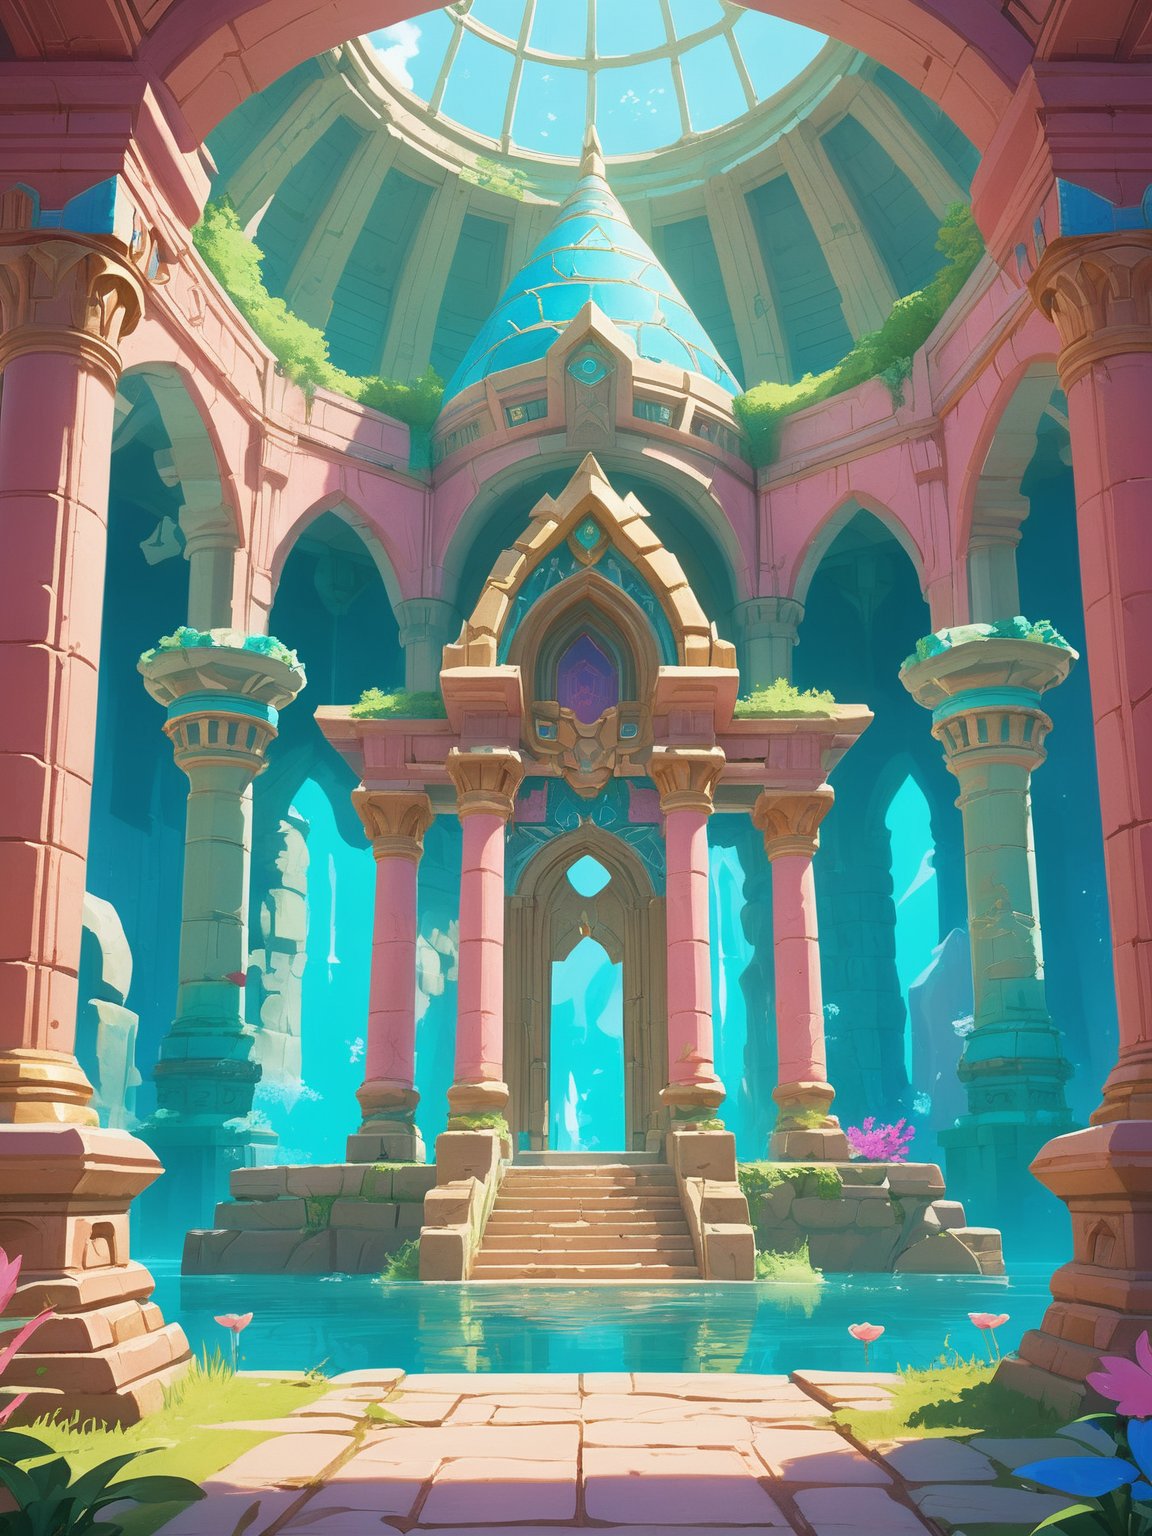 underwater temple, in the style of zelda breath of the wild, colorful pastel colors, inviting, expecting a hero, intricate details, beautiful architecture